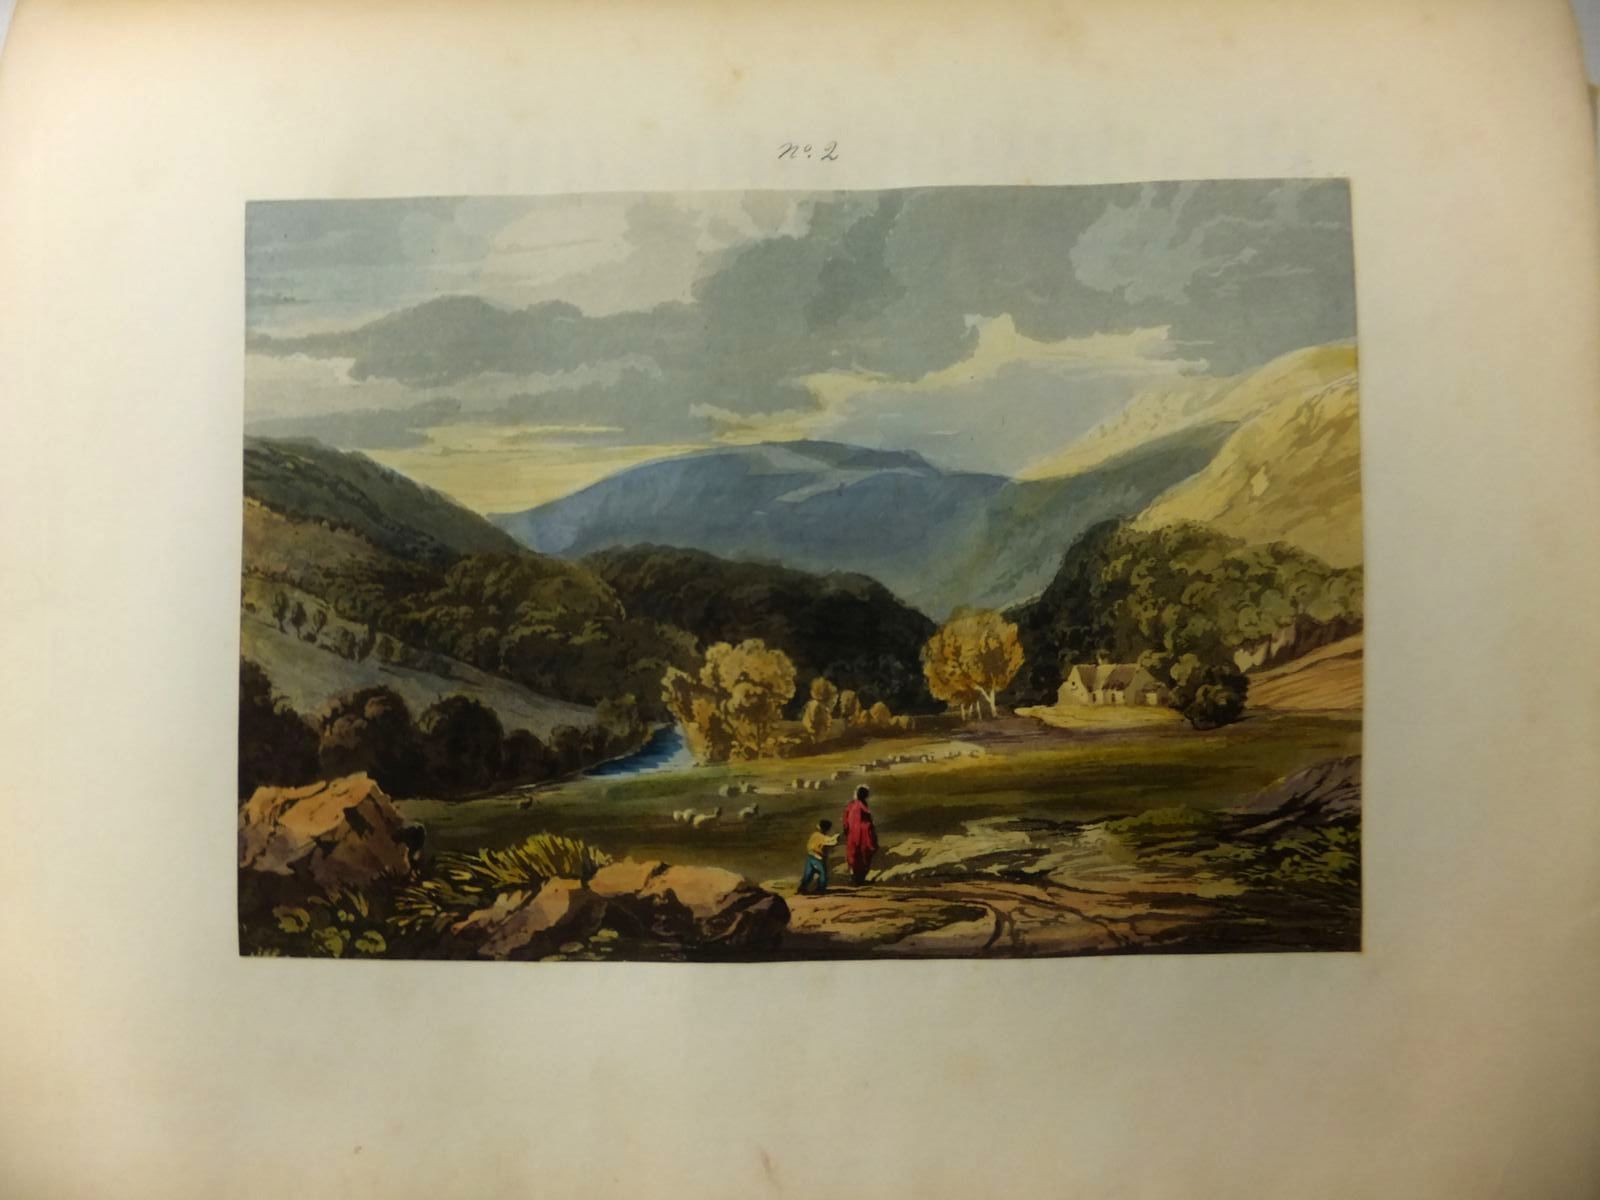 Photo of A PICTURESQUE DESCRIPTION OF THE RIVER WYE FROM THE SOURCE TO ITS JUNCTION WITH THE SEVERN written by Fielding, T.H. published by Ackermann & Co. (STOCK CODE: 570371)  for sale by Stella & Rose's Books